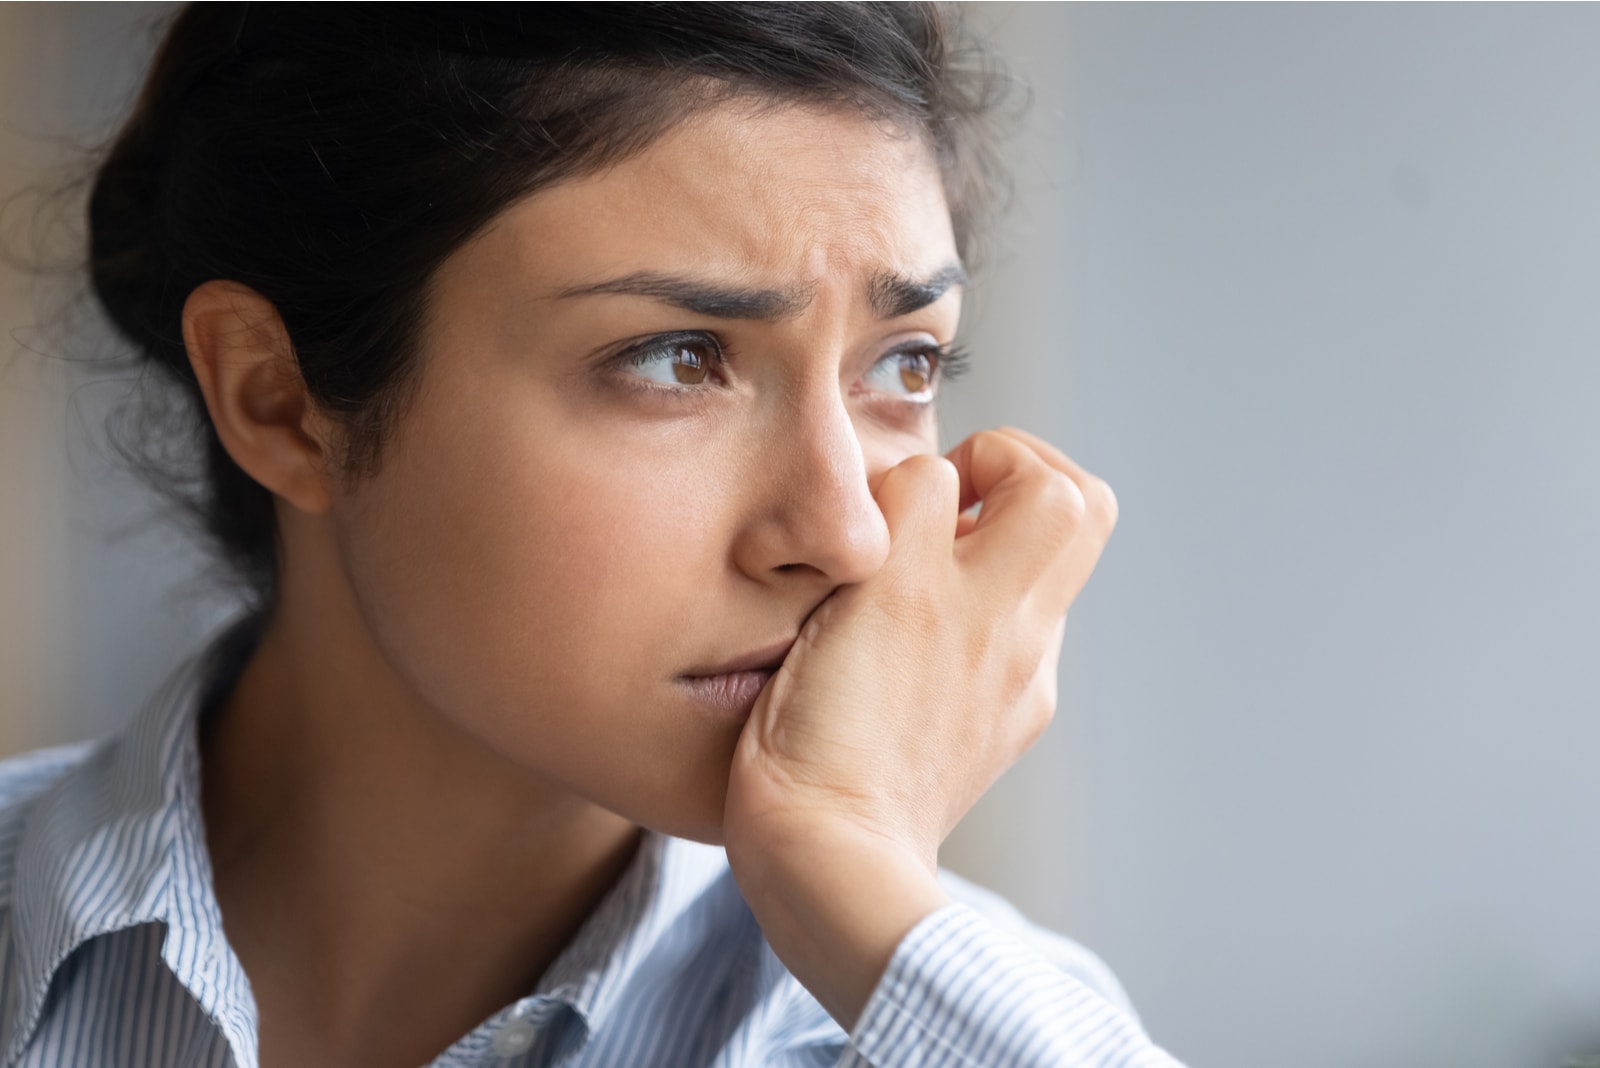 worried and upset woman looking away